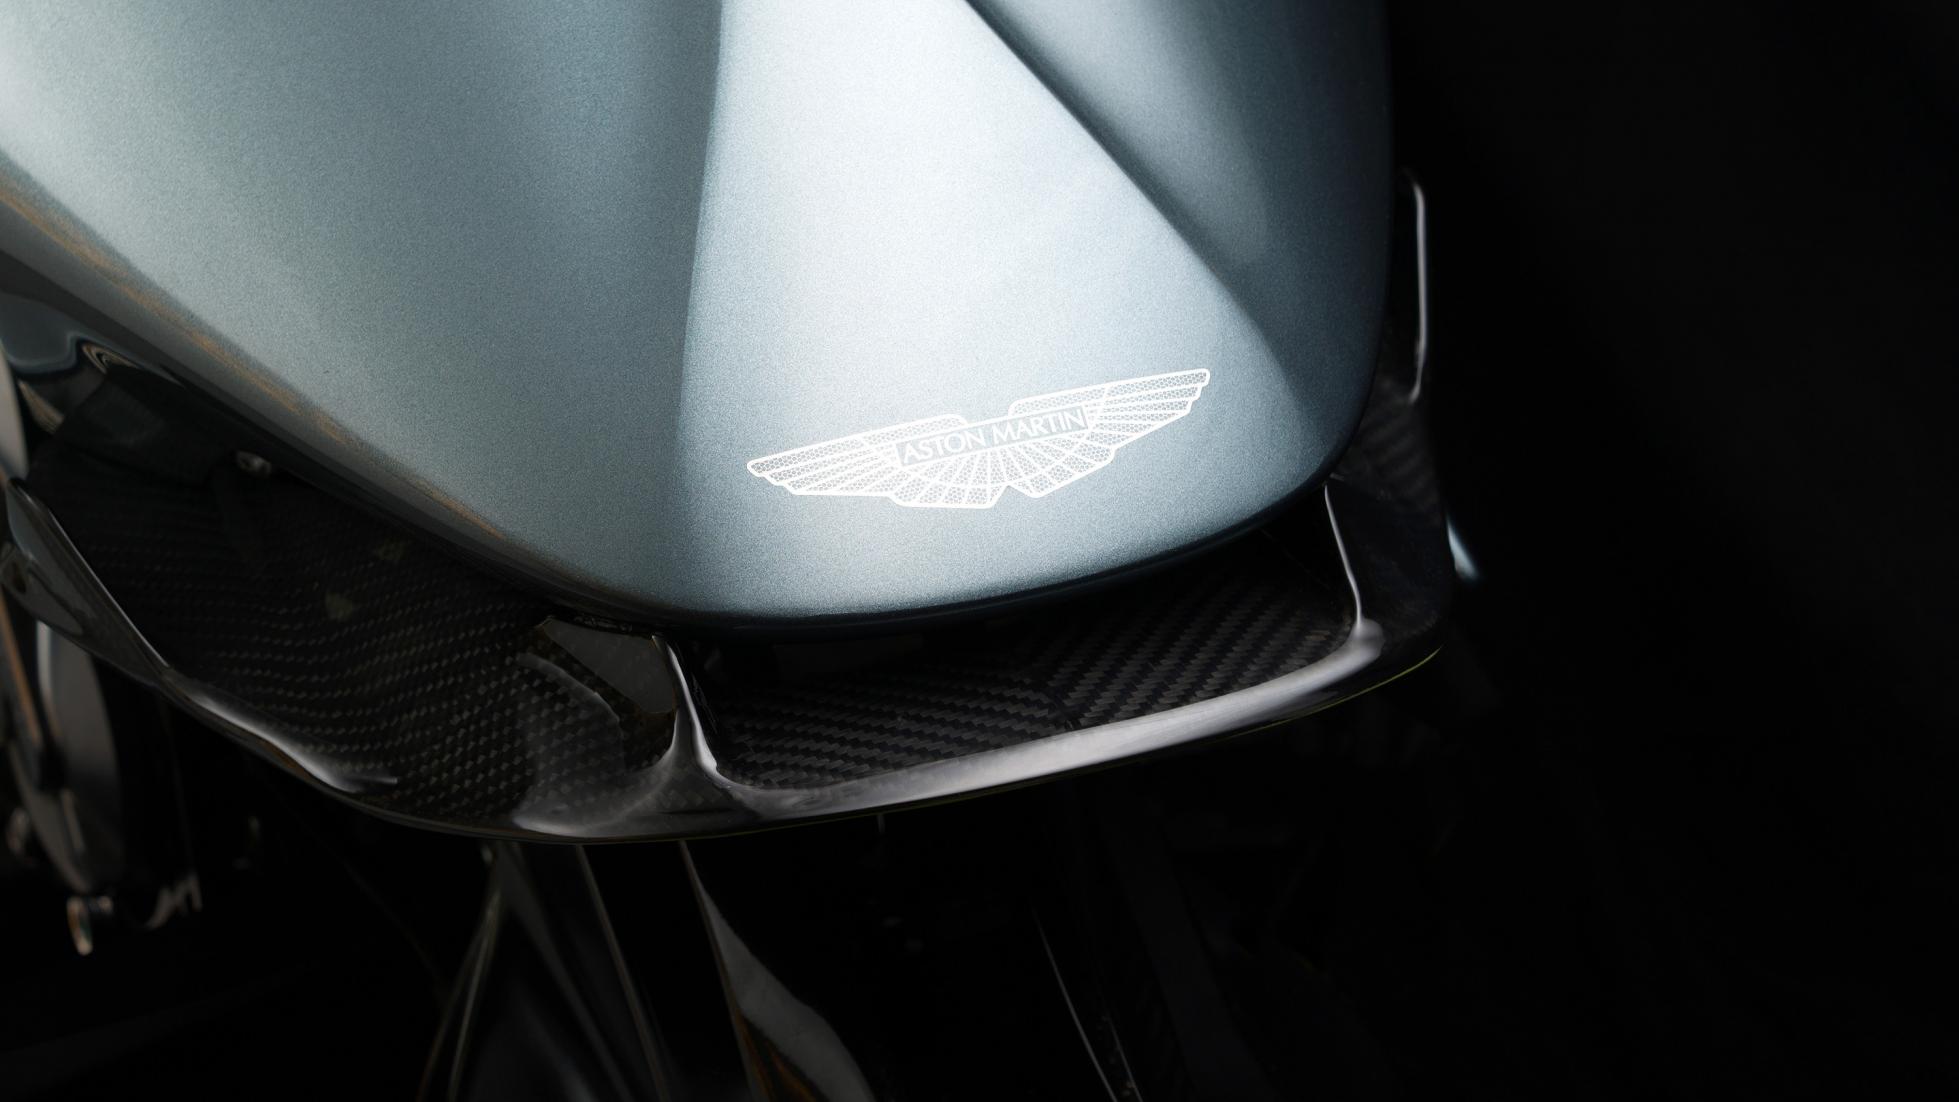 Of course Aston Martin's made a £95k (approx. RM506,000) bike